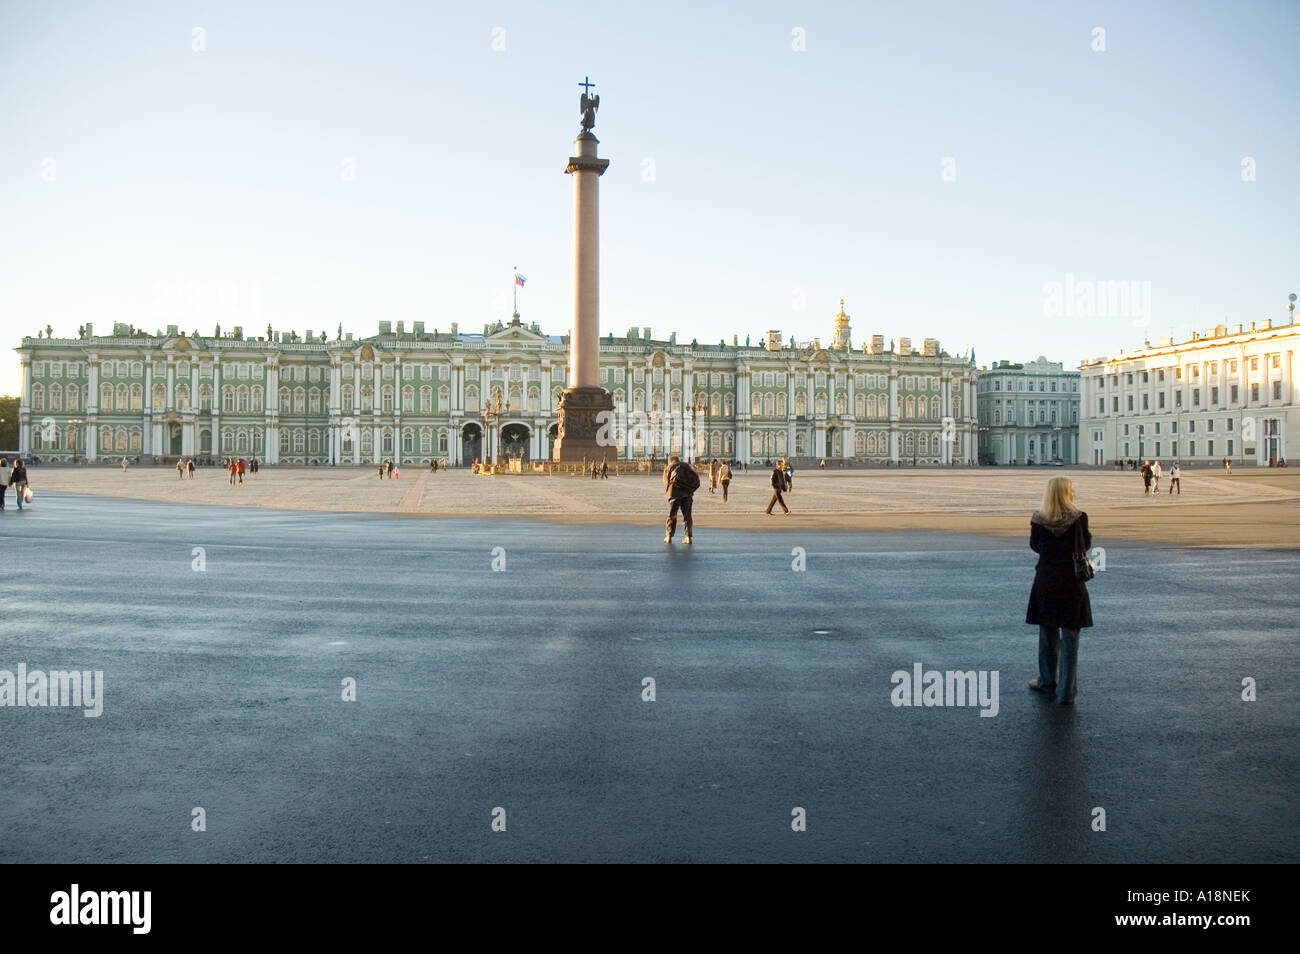 The Hermitage Winter palace in Saint Petersubrg Russia Stock Photo